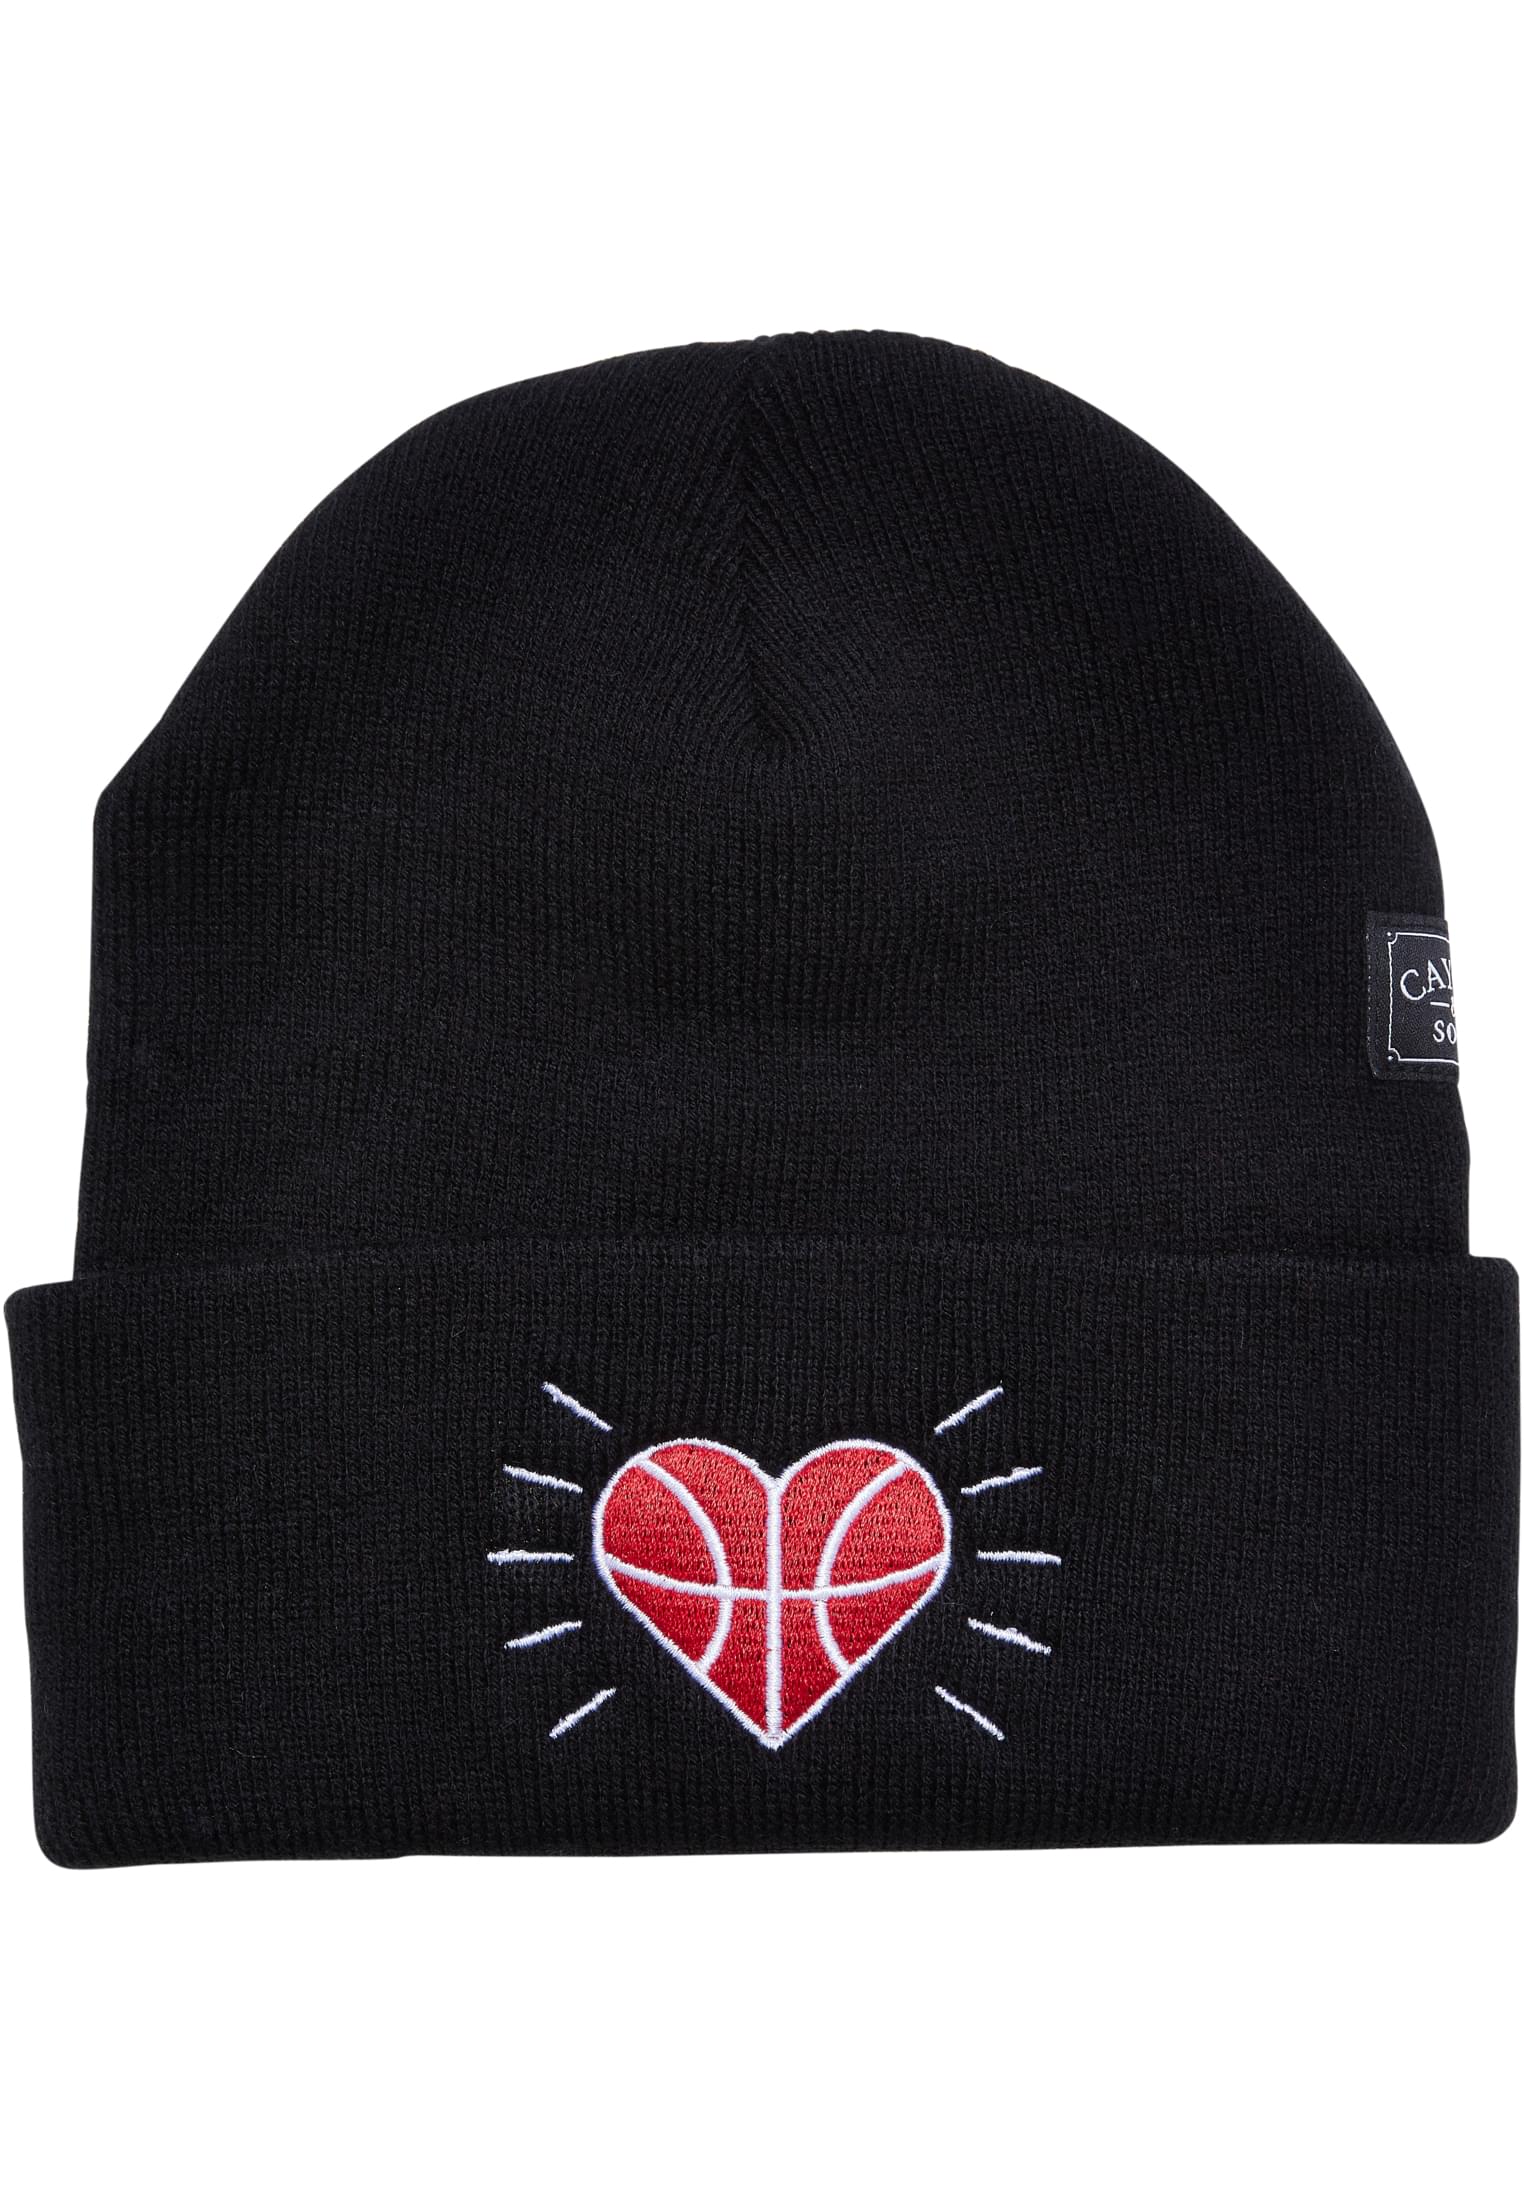 Heart For The Game Old School Beanie Black/mc